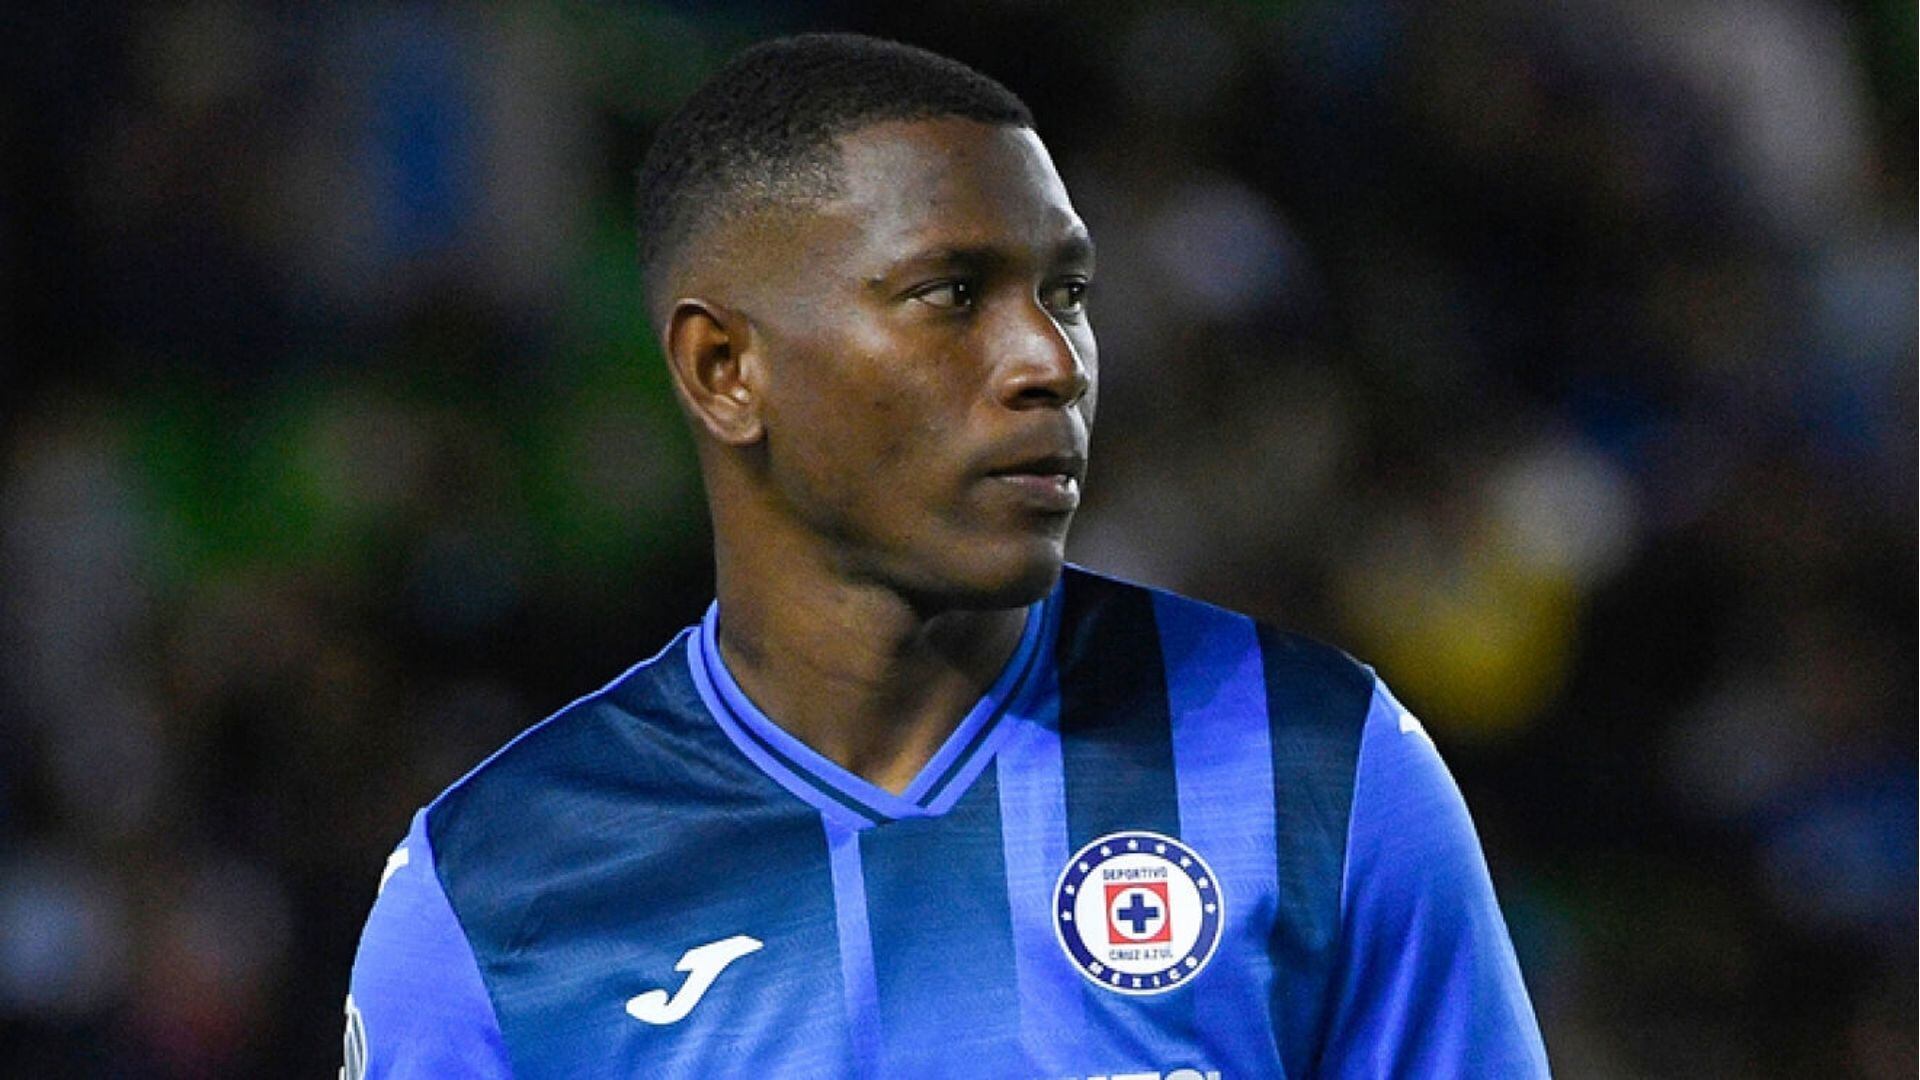 Cruz Azul is already looking for a new striker now that Brayan Angulo left